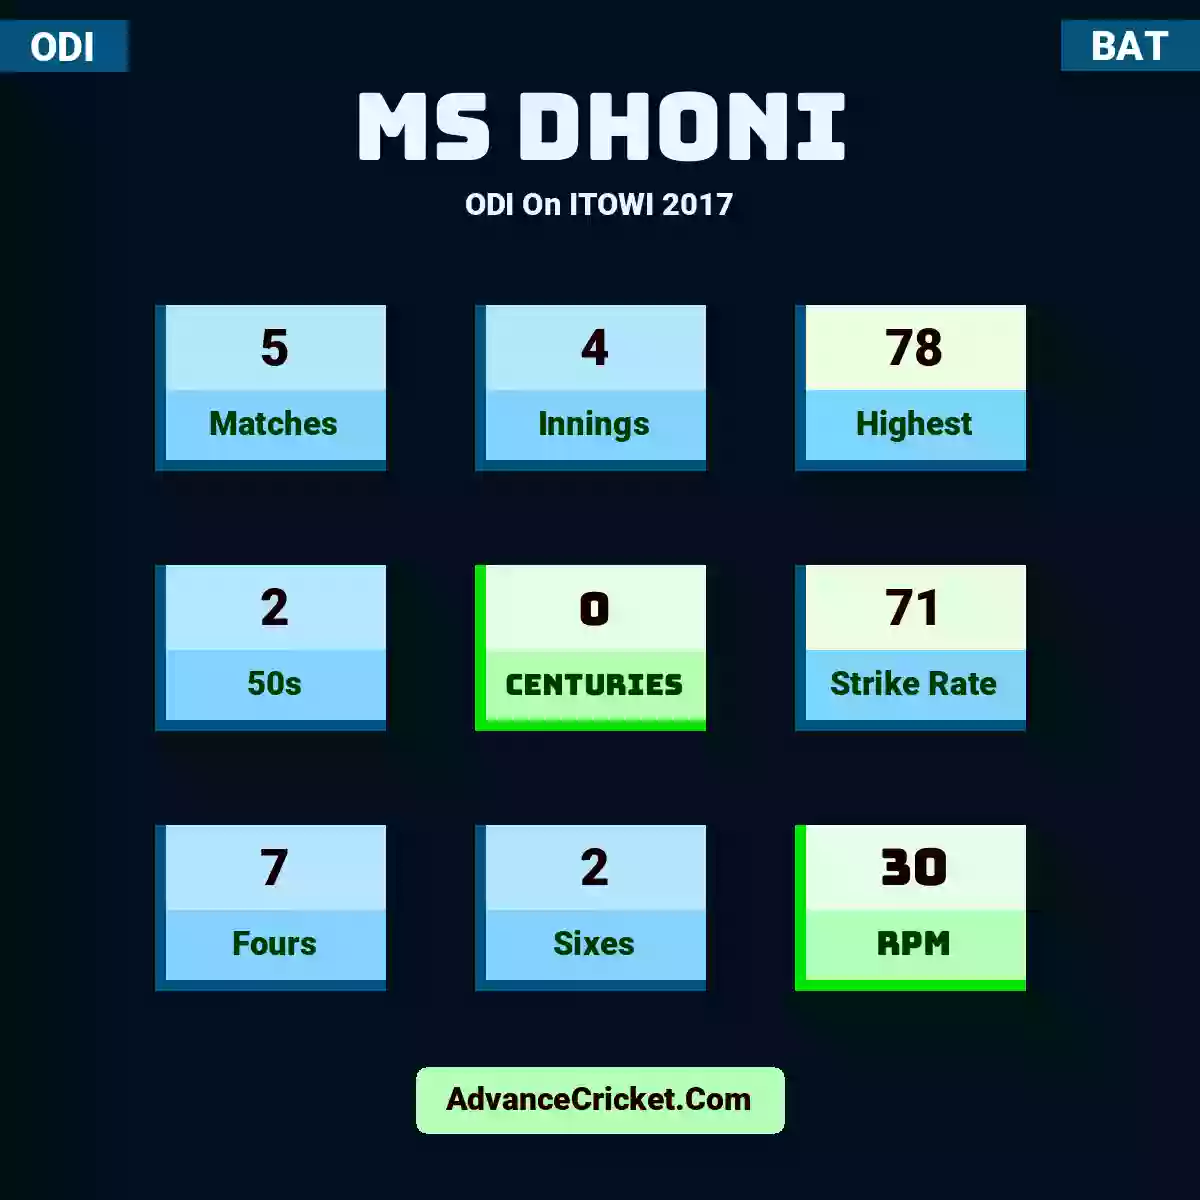 MS Dhoni ODI  On ITOWI 2017, MS Dhoni played 5 matches, scored 78 runs as highest, 2 half-centuries, and 0 centuries, with a strike rate of 71. M.Dhoni hit 7 fours and 2 sixes, with an RPM of 30.